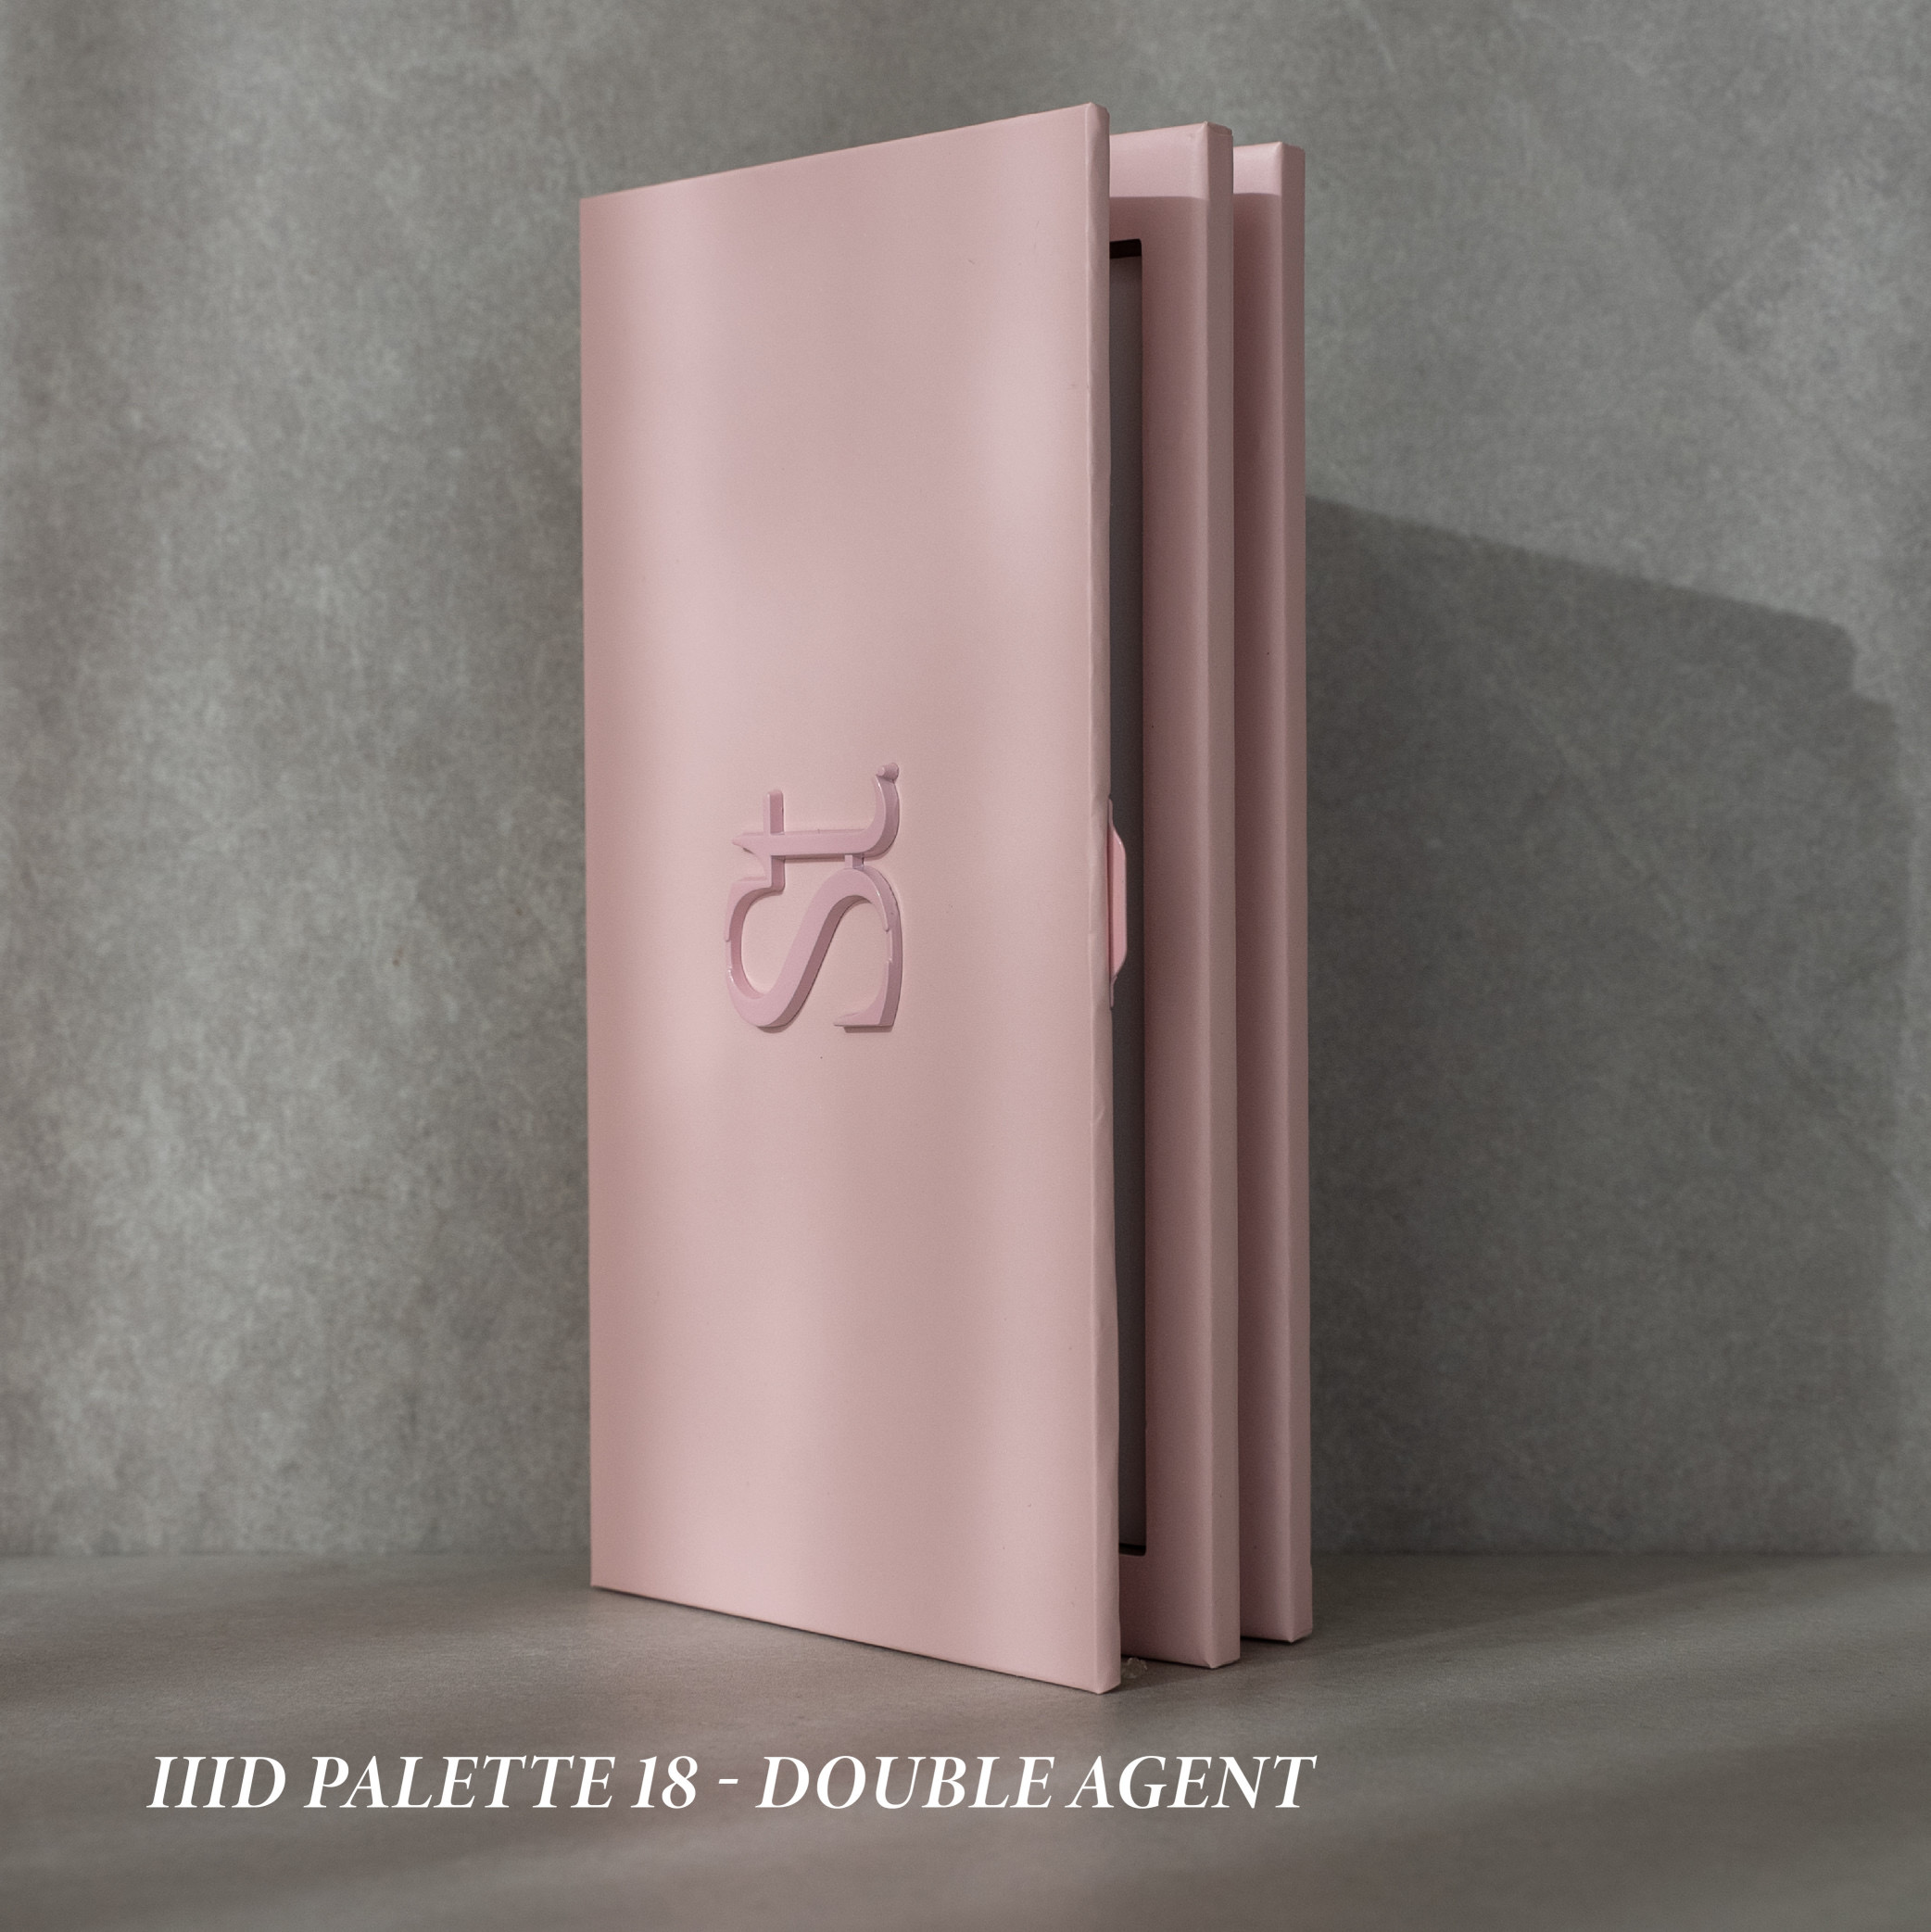 IIID Palette 18 - Double Agent